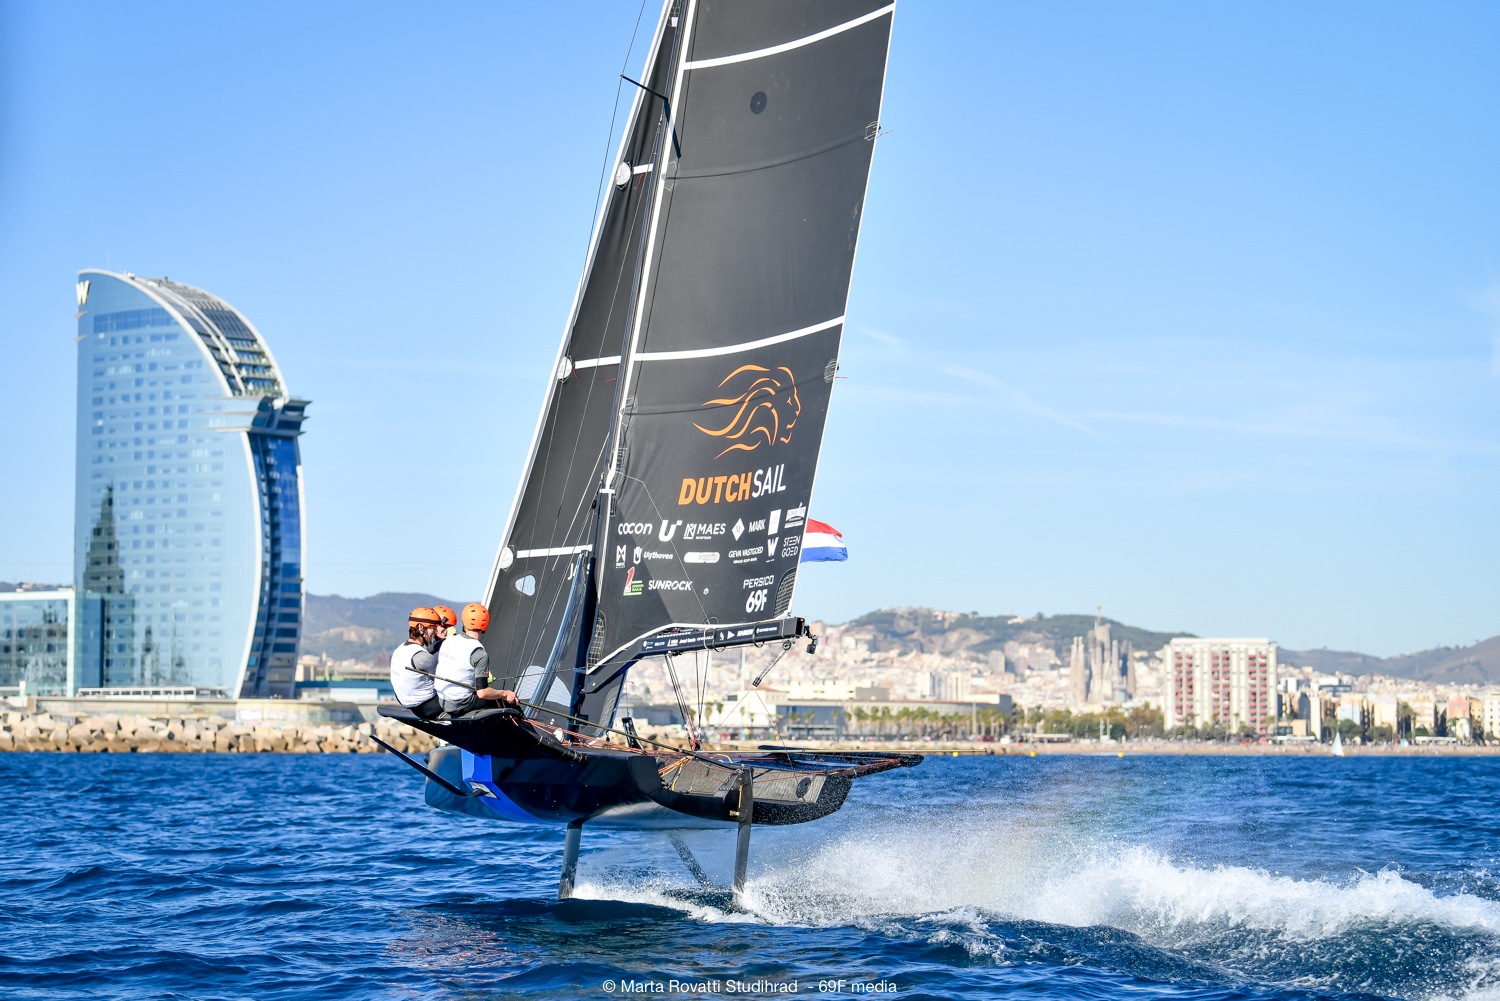 69F Youth Foiling Gold Cup al via a Barcellona